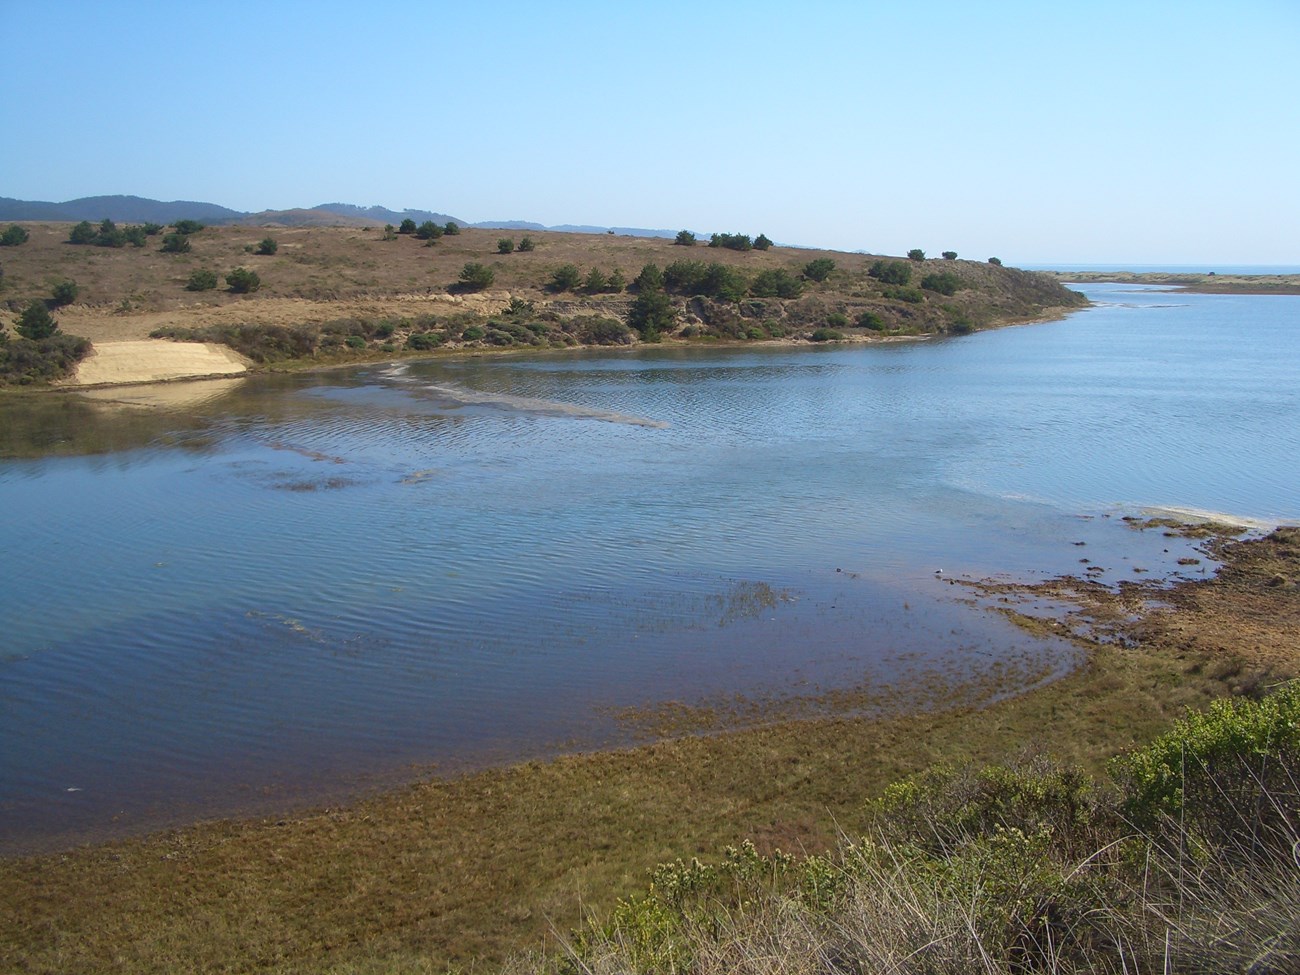 Photo of a very low-profile, shrub-covered dam that has been partially breached at the mouth of a shallow valley.